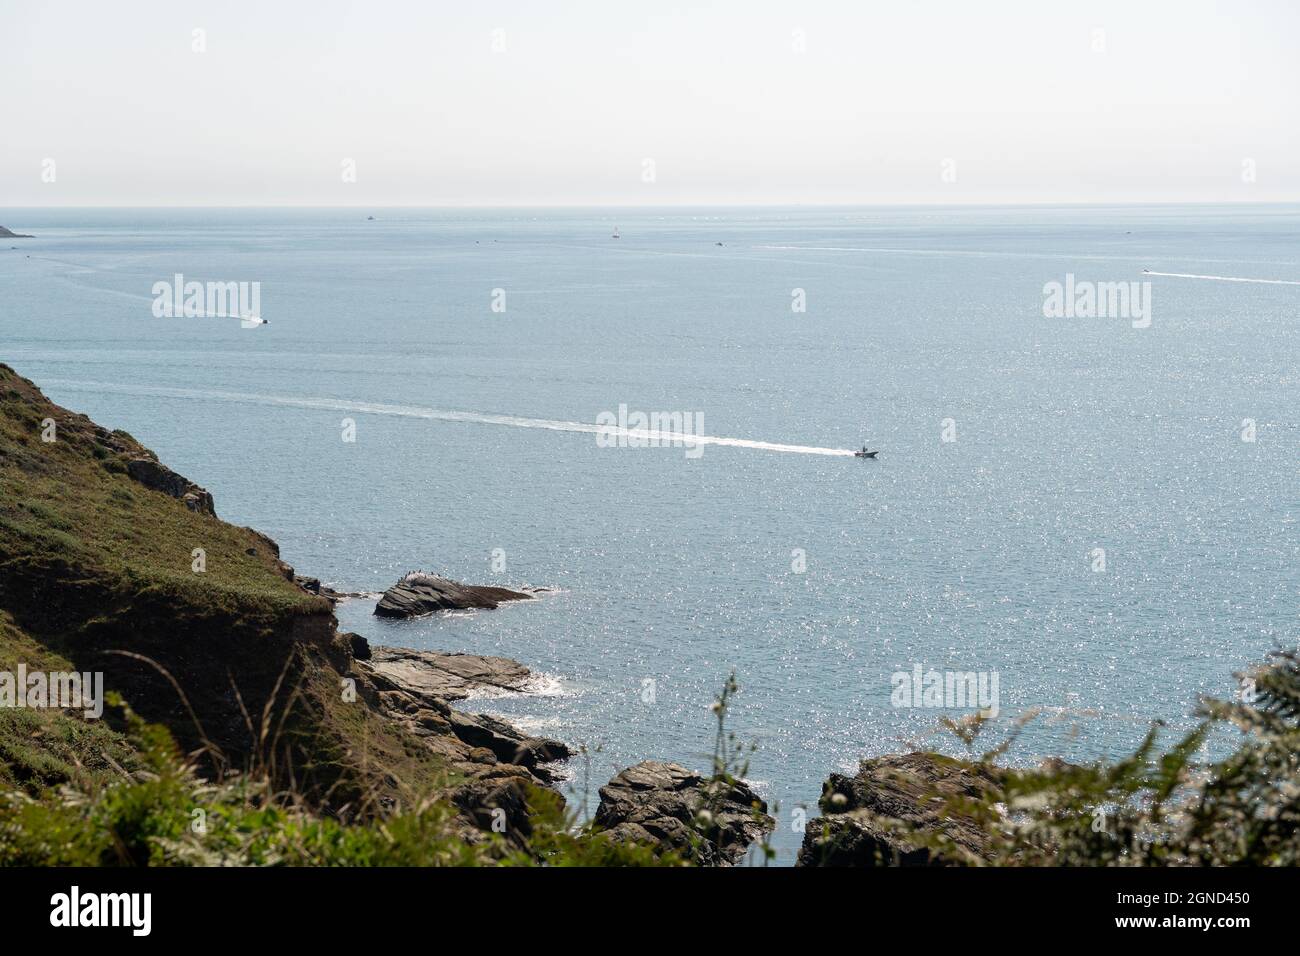 View across the English Channel from the Southwest Coastal Path, Portlemouth Down, The Bull, near Salcombe, Devon showing lots of activity at sea. Stock Photo